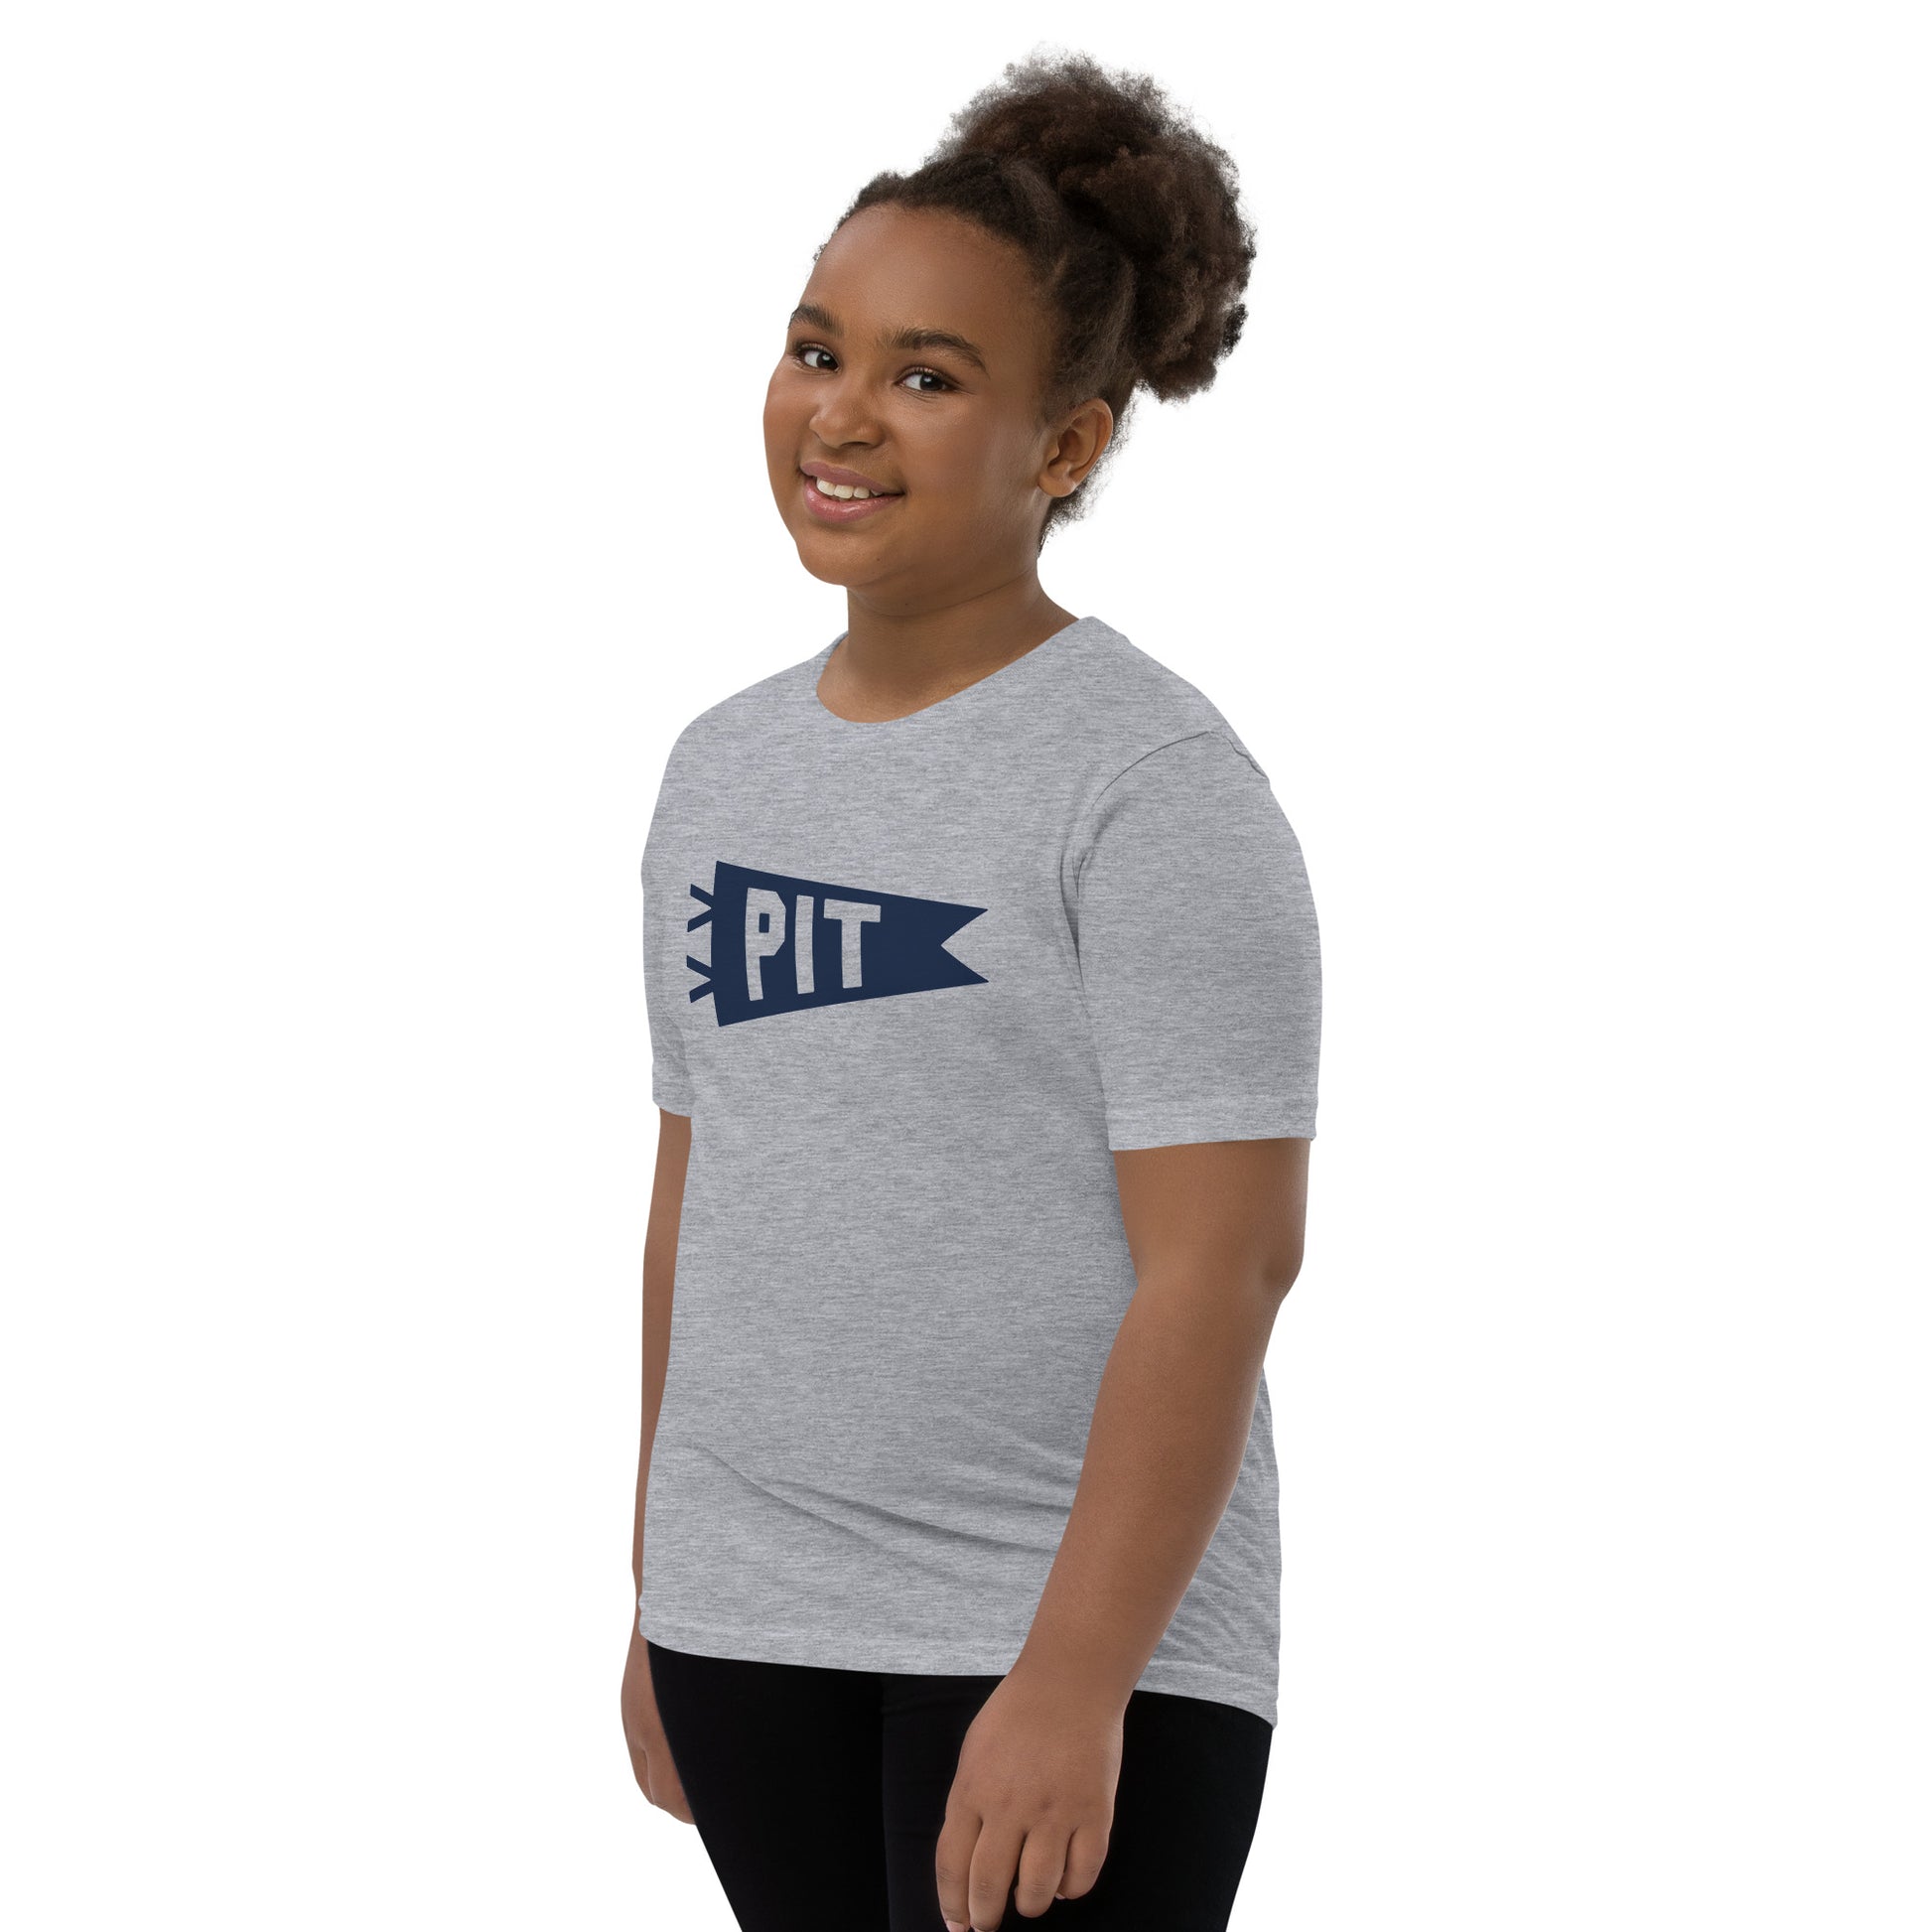 Kid's Airport Code Tee - Navy Blue Graphic • PIT Pittsburgh • YHM Designs - Image 04